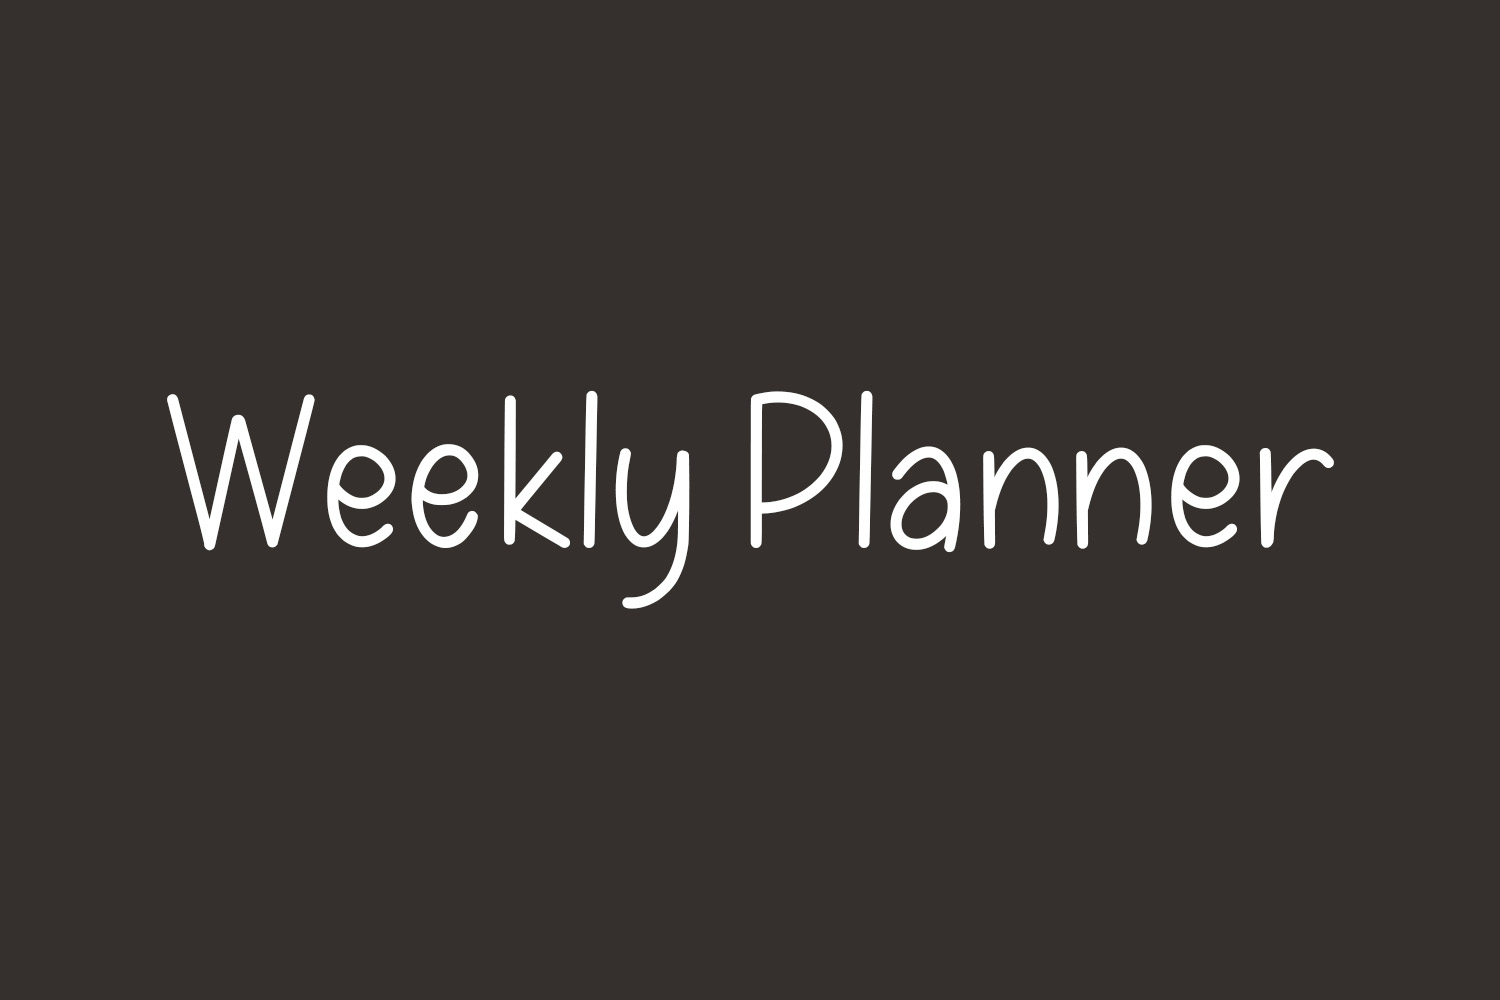 Weekly Planner Free Font